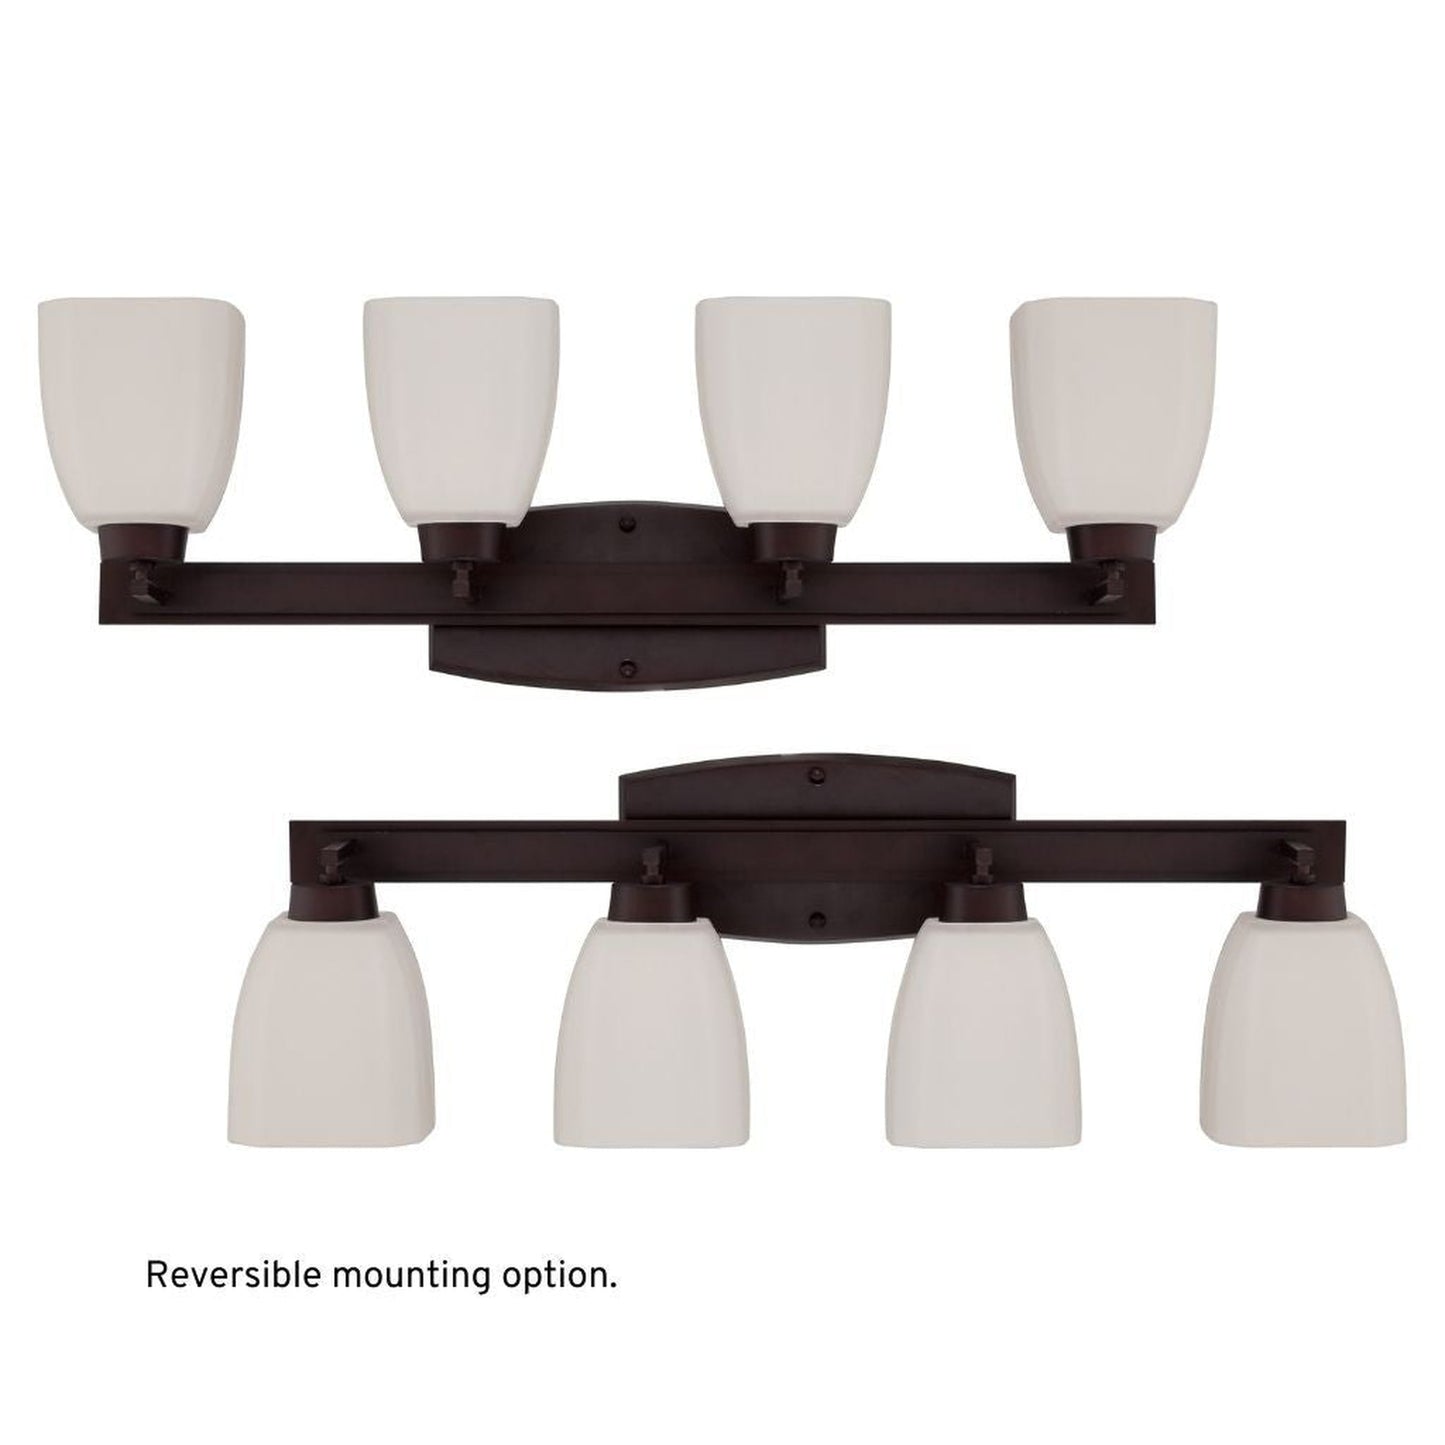 Craftmade Bridwell 28" 4-Light Oiled Bronze Vanity Light With White Frosted Glass Shades